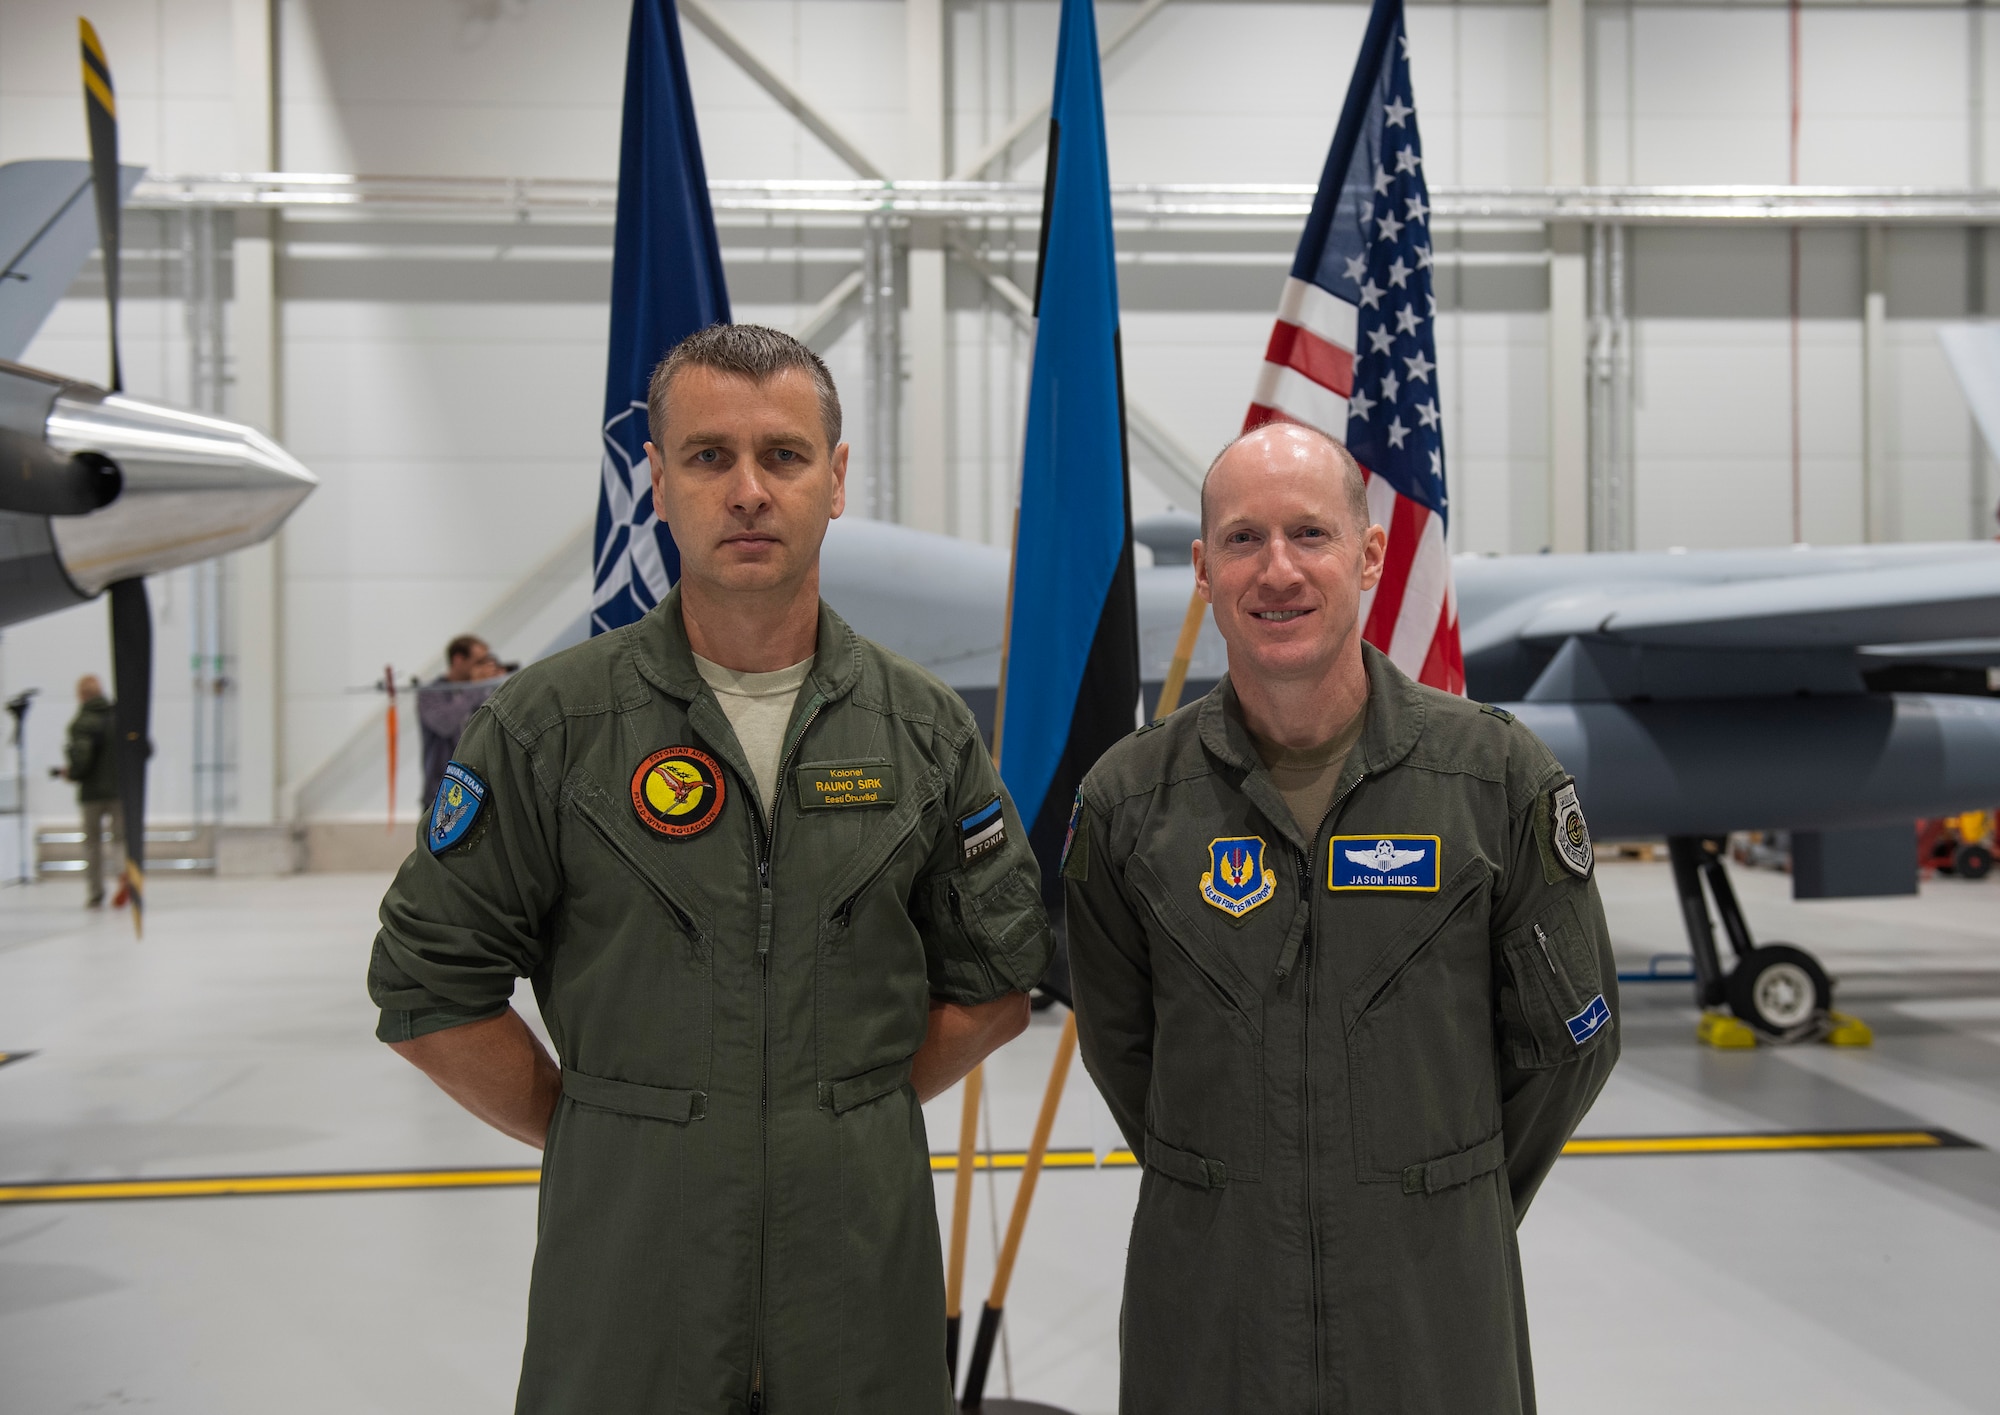 U.S. Air Force Brig. Gen. Jason Hinds, Deputy Director of Operations, Strategic Deterrence and Nuclear Integration and the United States Air Forces in Europe and United States Air Forces Africa Air Operations Center Director, right, poses for a photo with Colonel Rauno Sirk, Estonian air force commander, at Amari Air Base, Estonia, July 1, 2020. The MQ-9 Reaper is deployed to Amari AB for the first time in history. (U.S. Air Force photo by Airman 1st Class Alison Stewart)